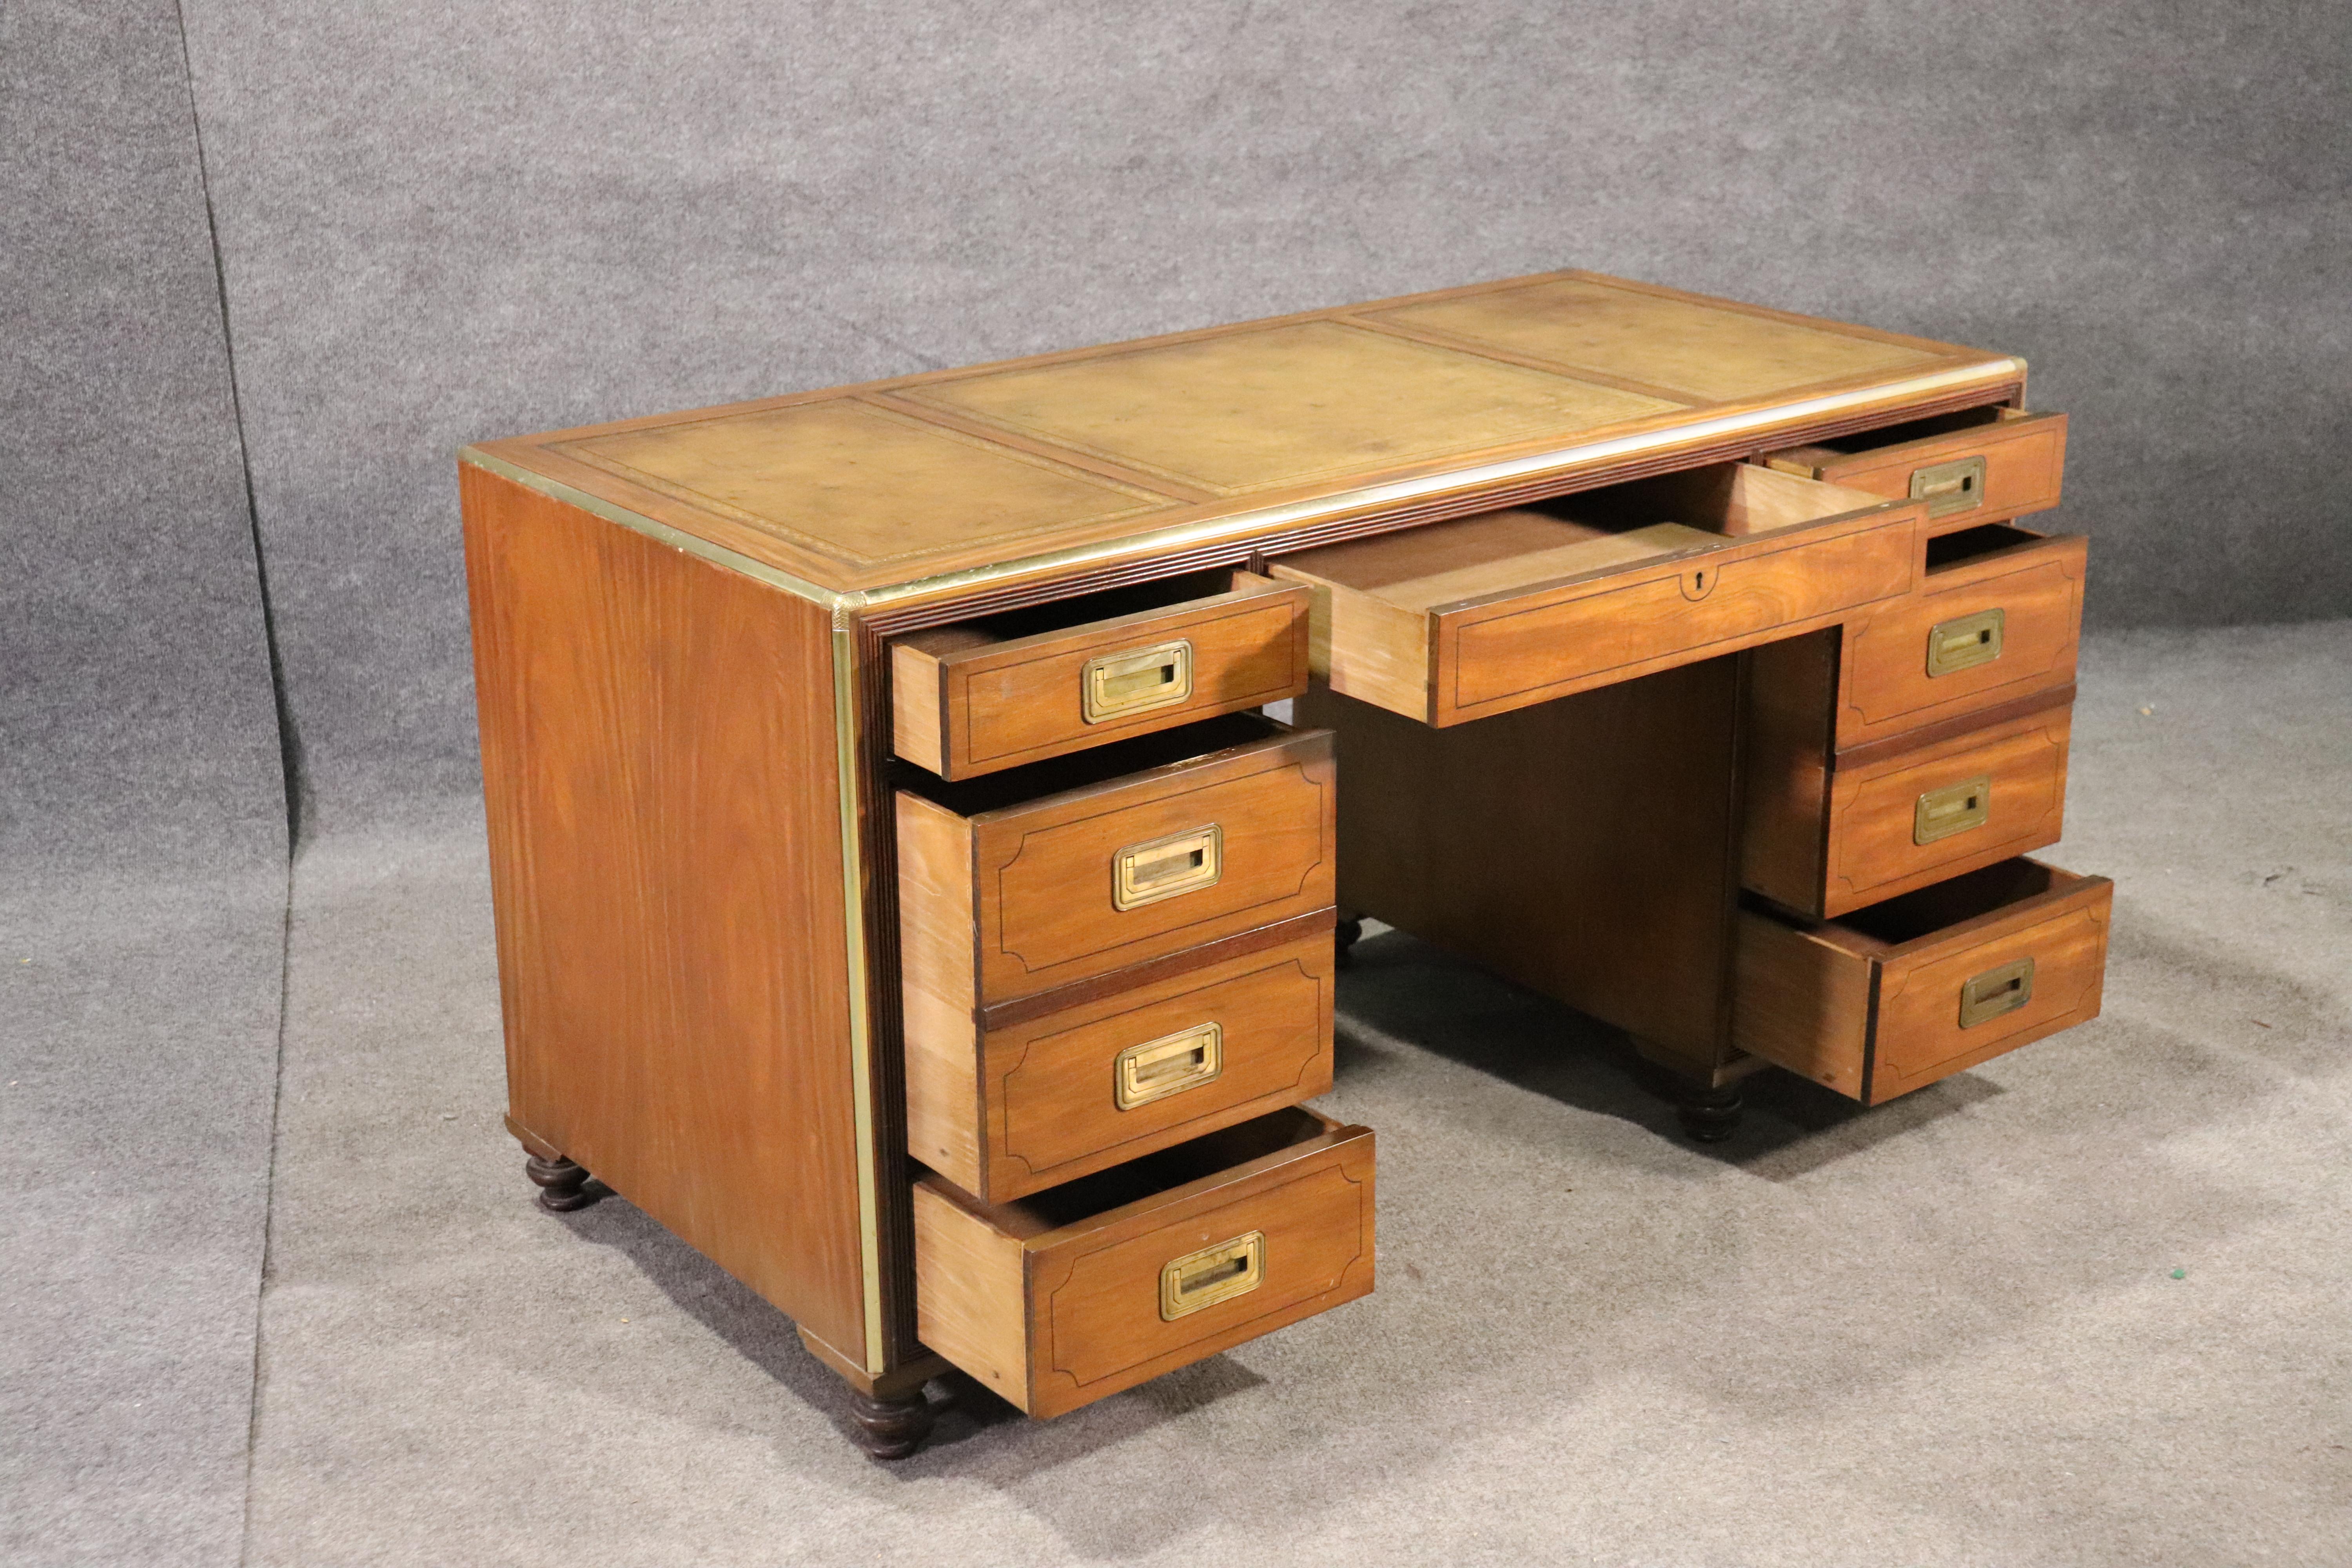 This is a classic Baker campaign desk with a bookshelf back and a gorgeous leather top. The desk is in good vintage condition and hard to find these days. The desk measures 56 wide x 27 deep x 31 tall. This is a classic style of desk that will never